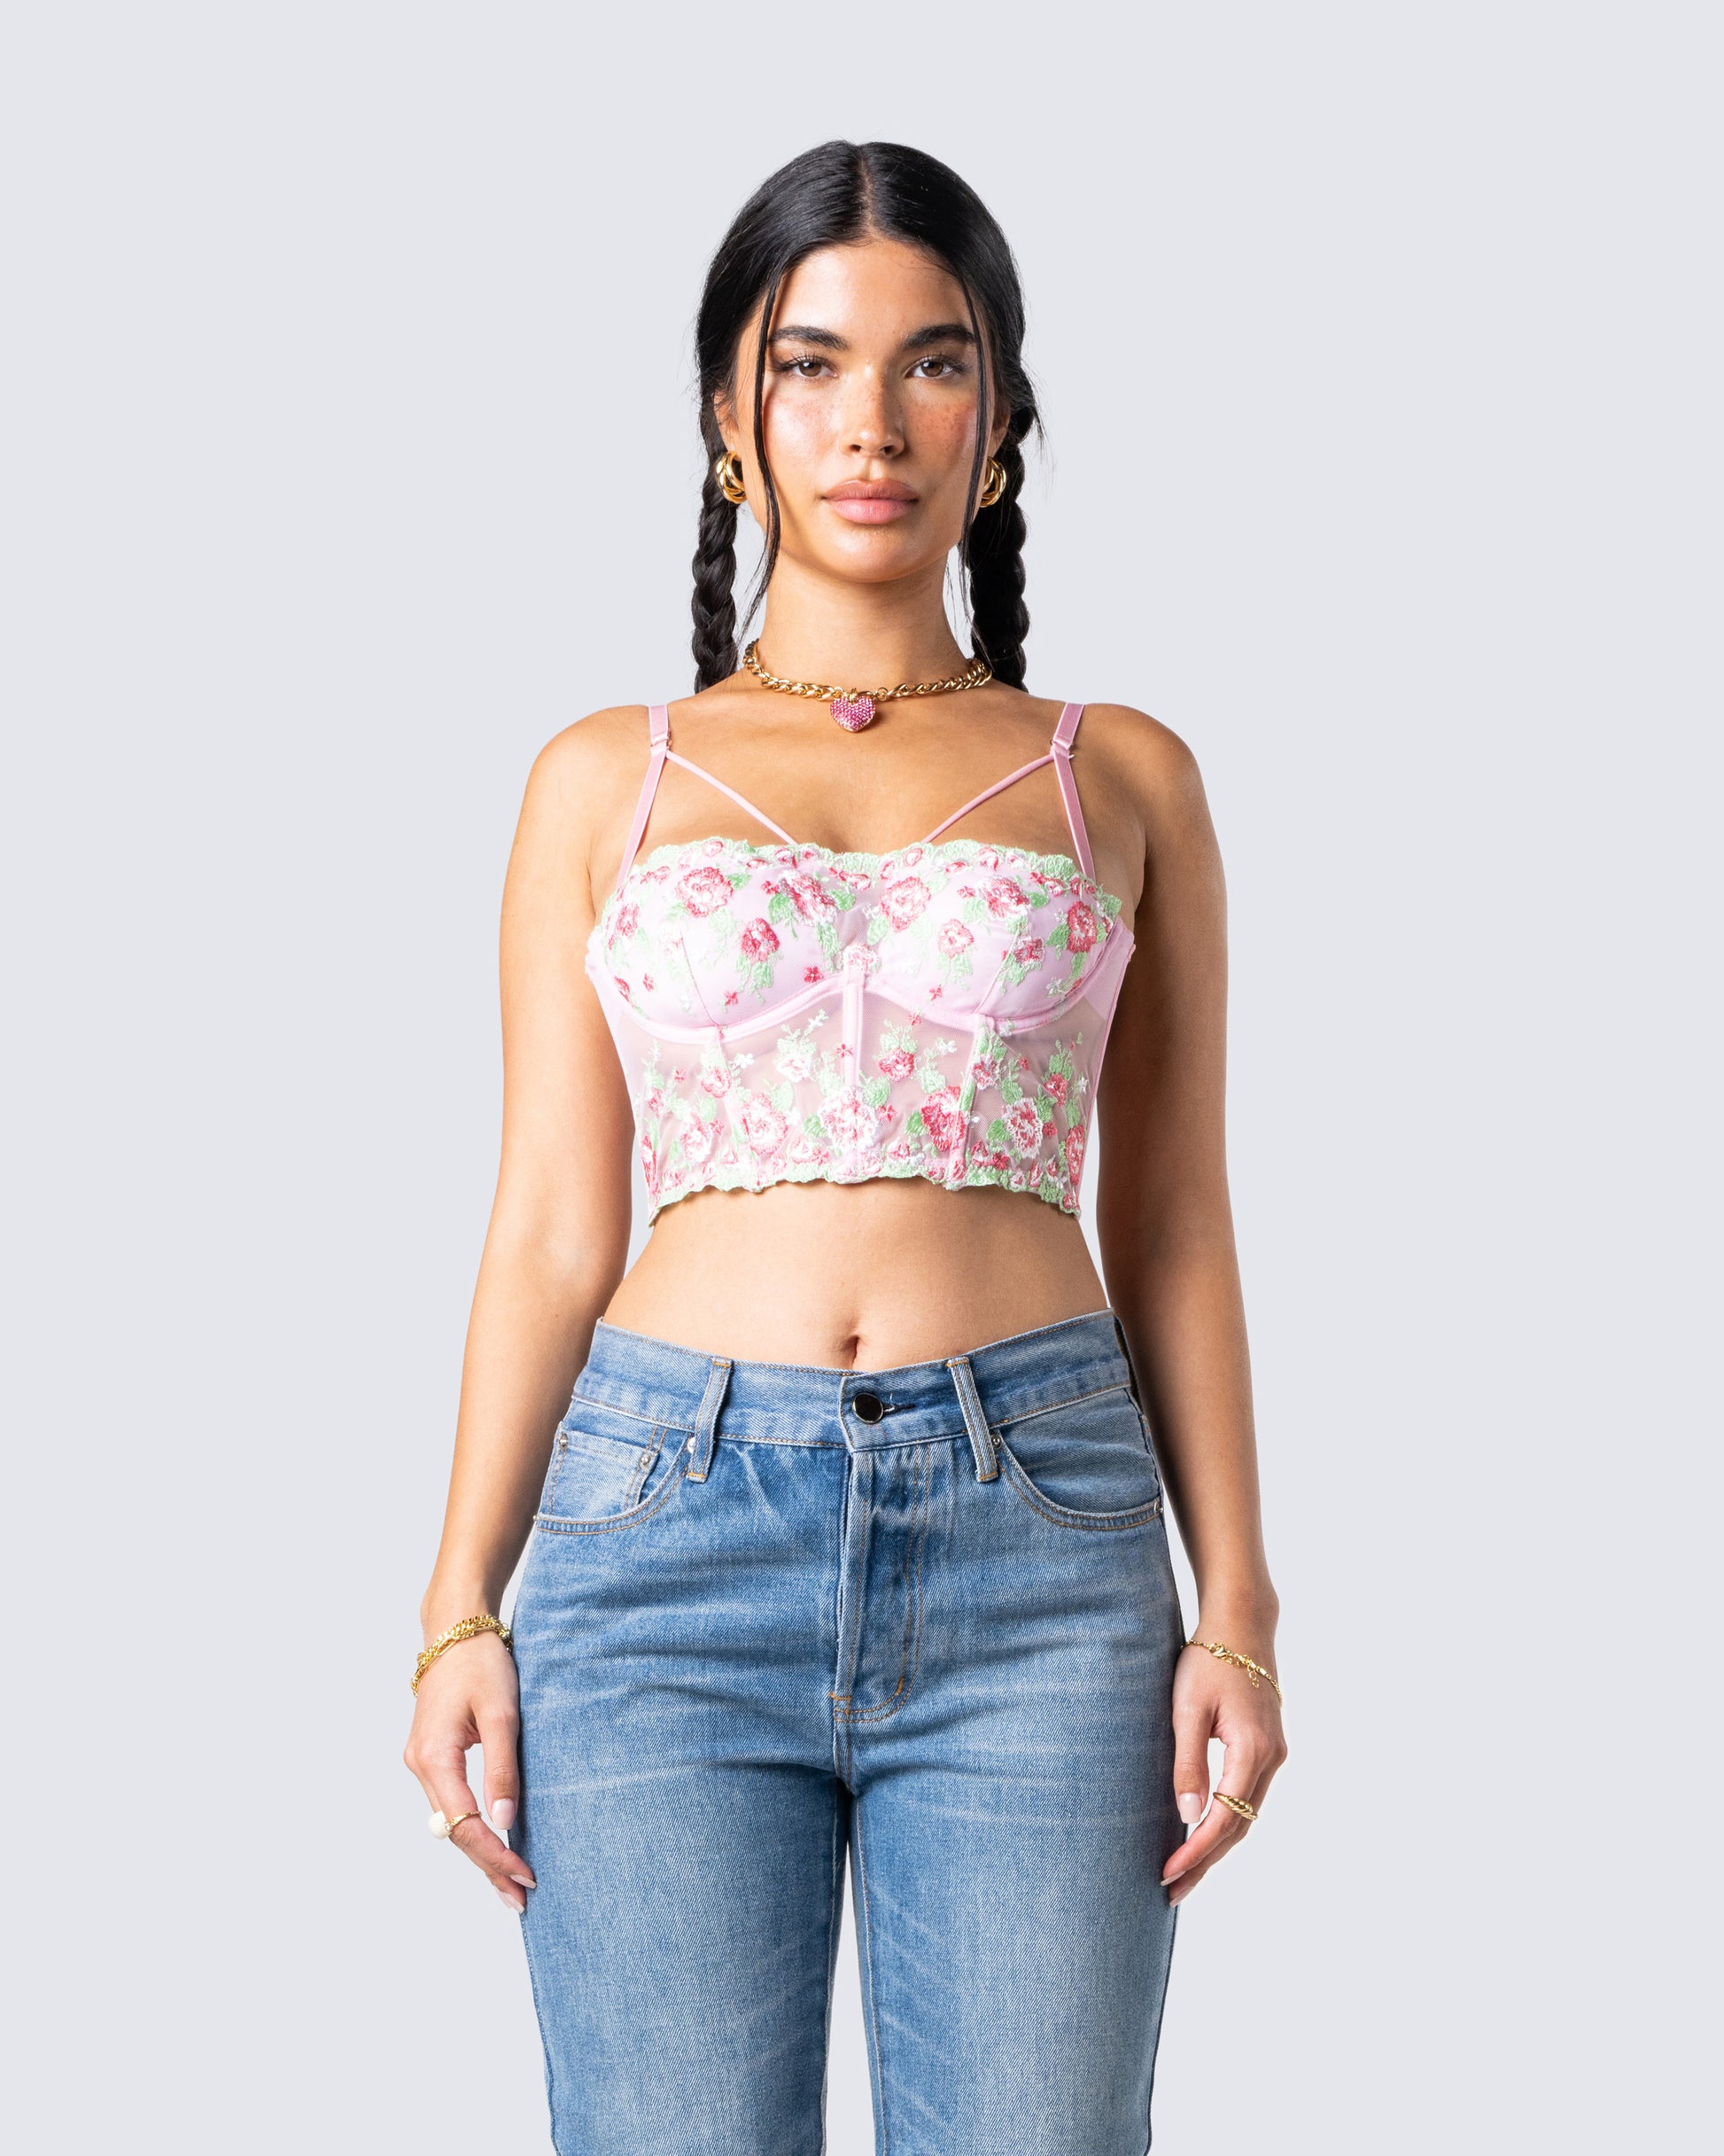 Shop Women's Pink Floral Corset Top and Pants